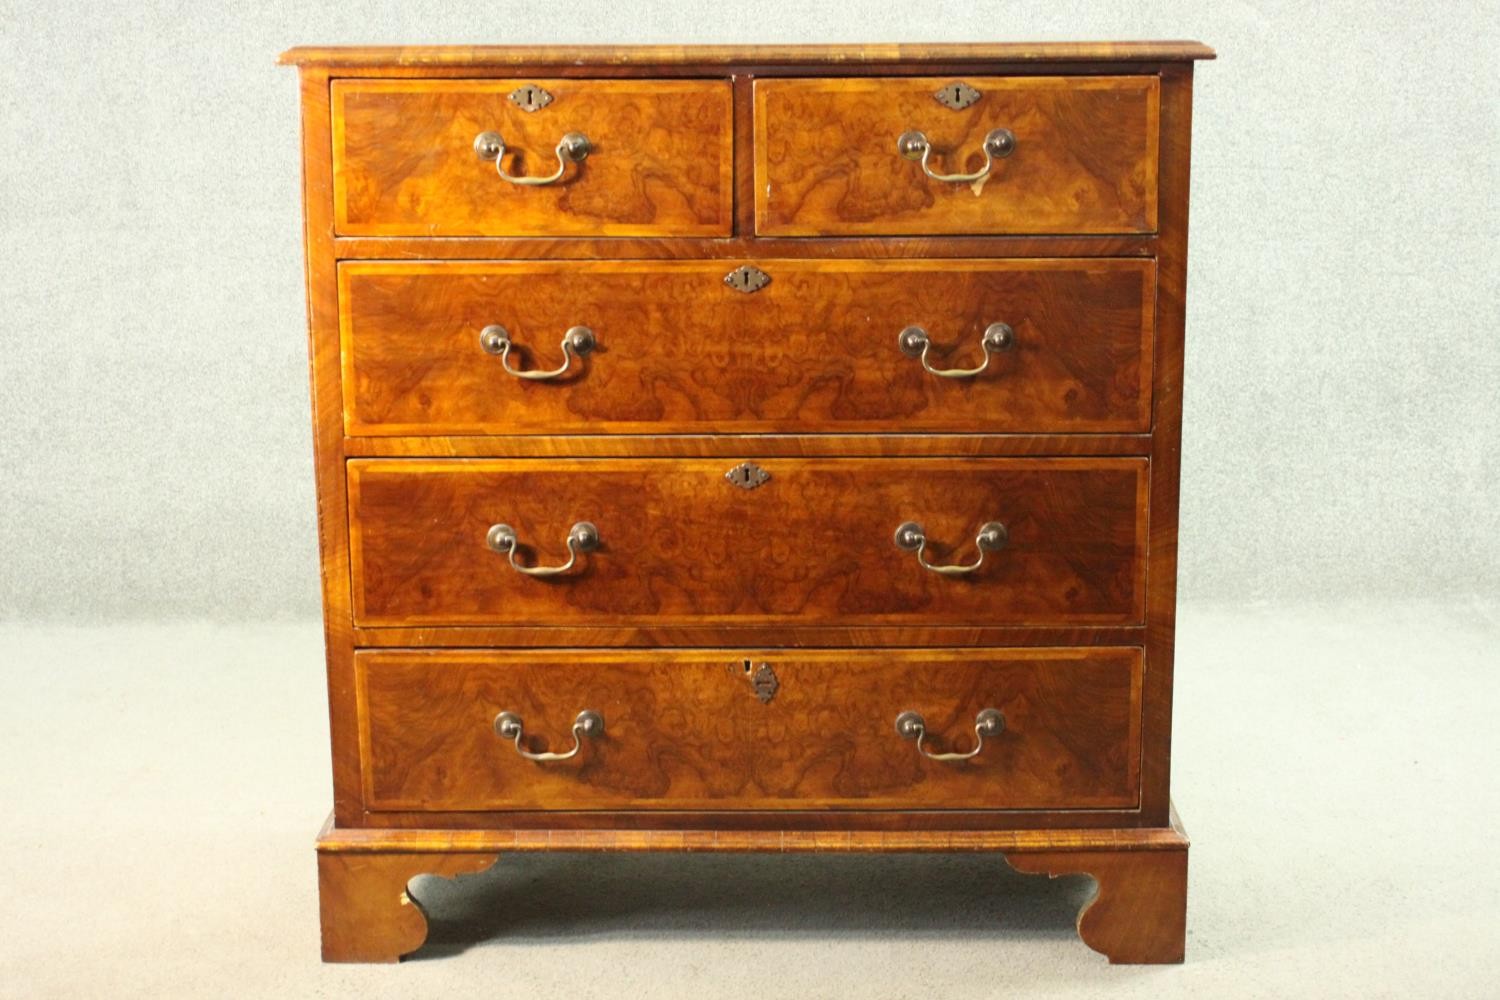 A 19th century early Georgian style walnut, crossbanded and featherbanded chest of drawers with